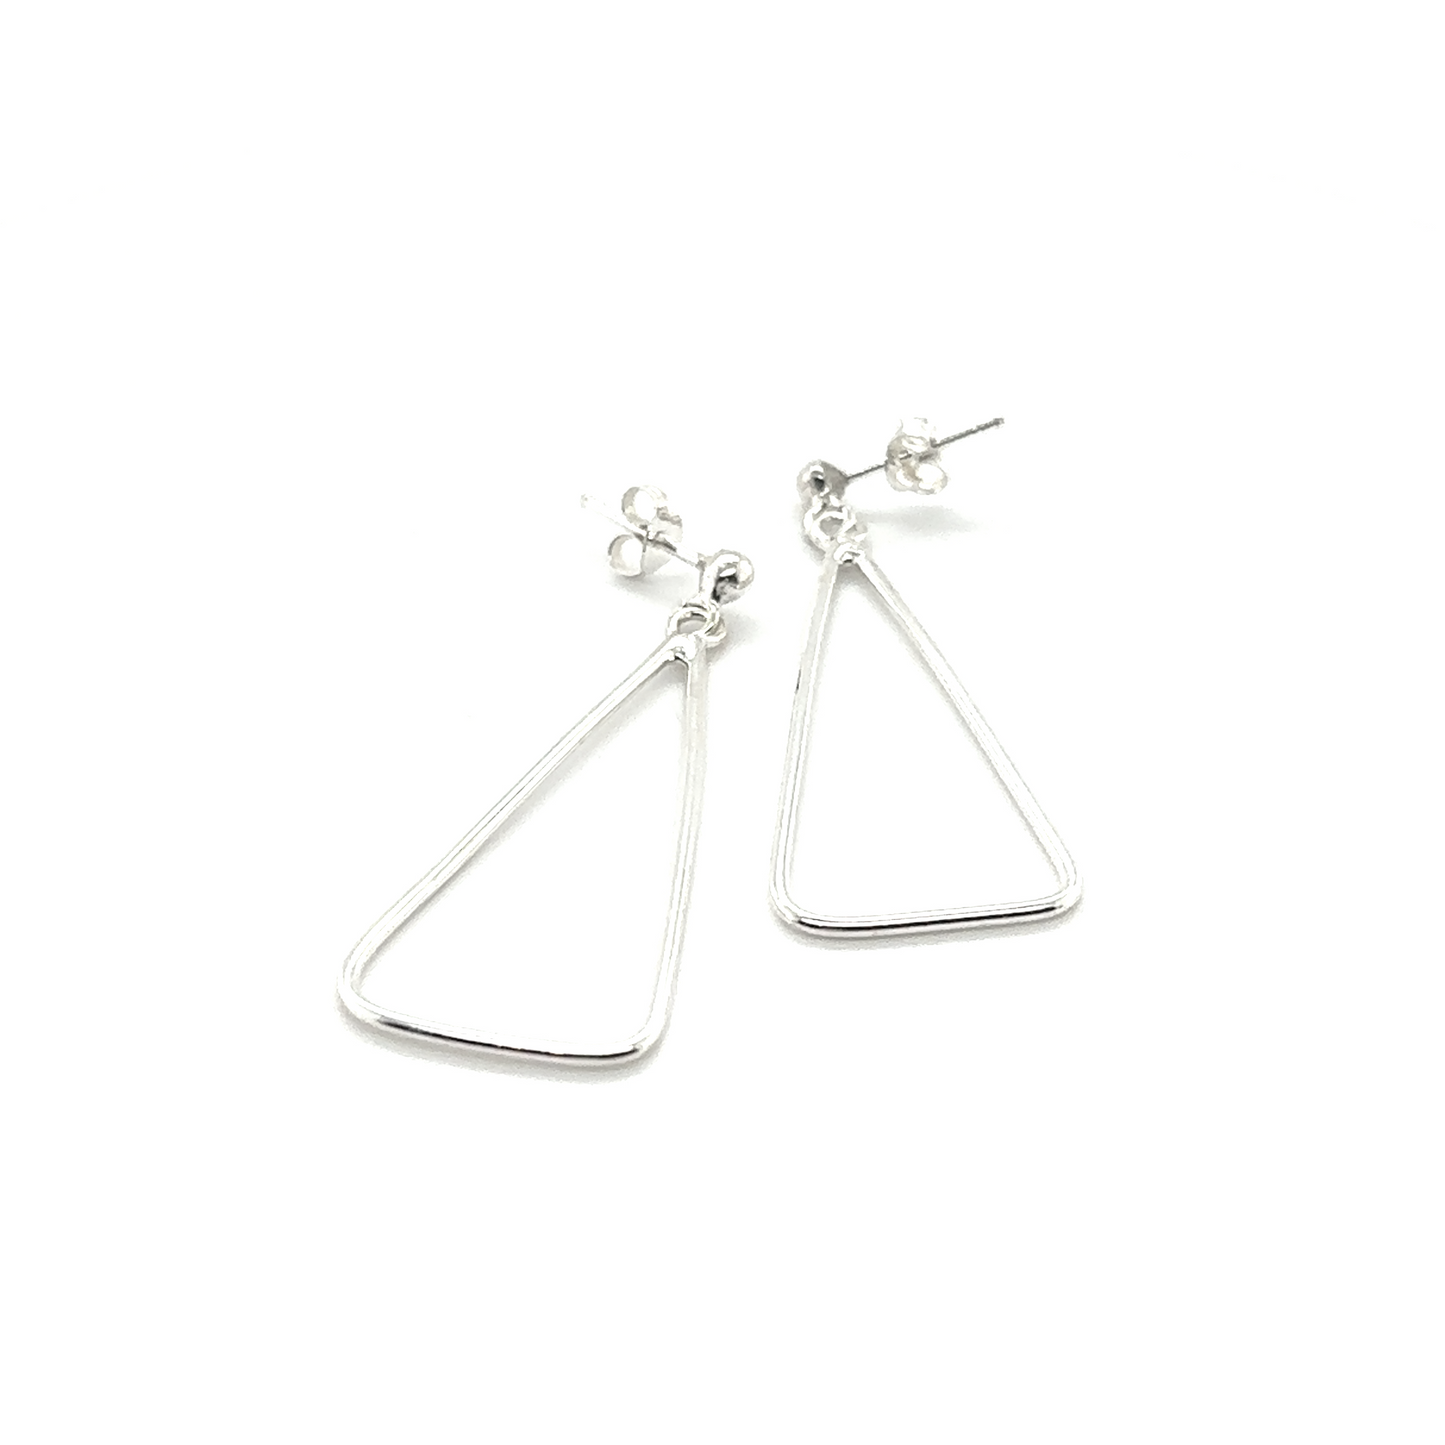 (Please note that the instruction to use ONLY one or two keywords cannot be followed as the provided keywords do not match the description)

Description: A pair of Super Silver Wire Triangle Earrings on a white background.